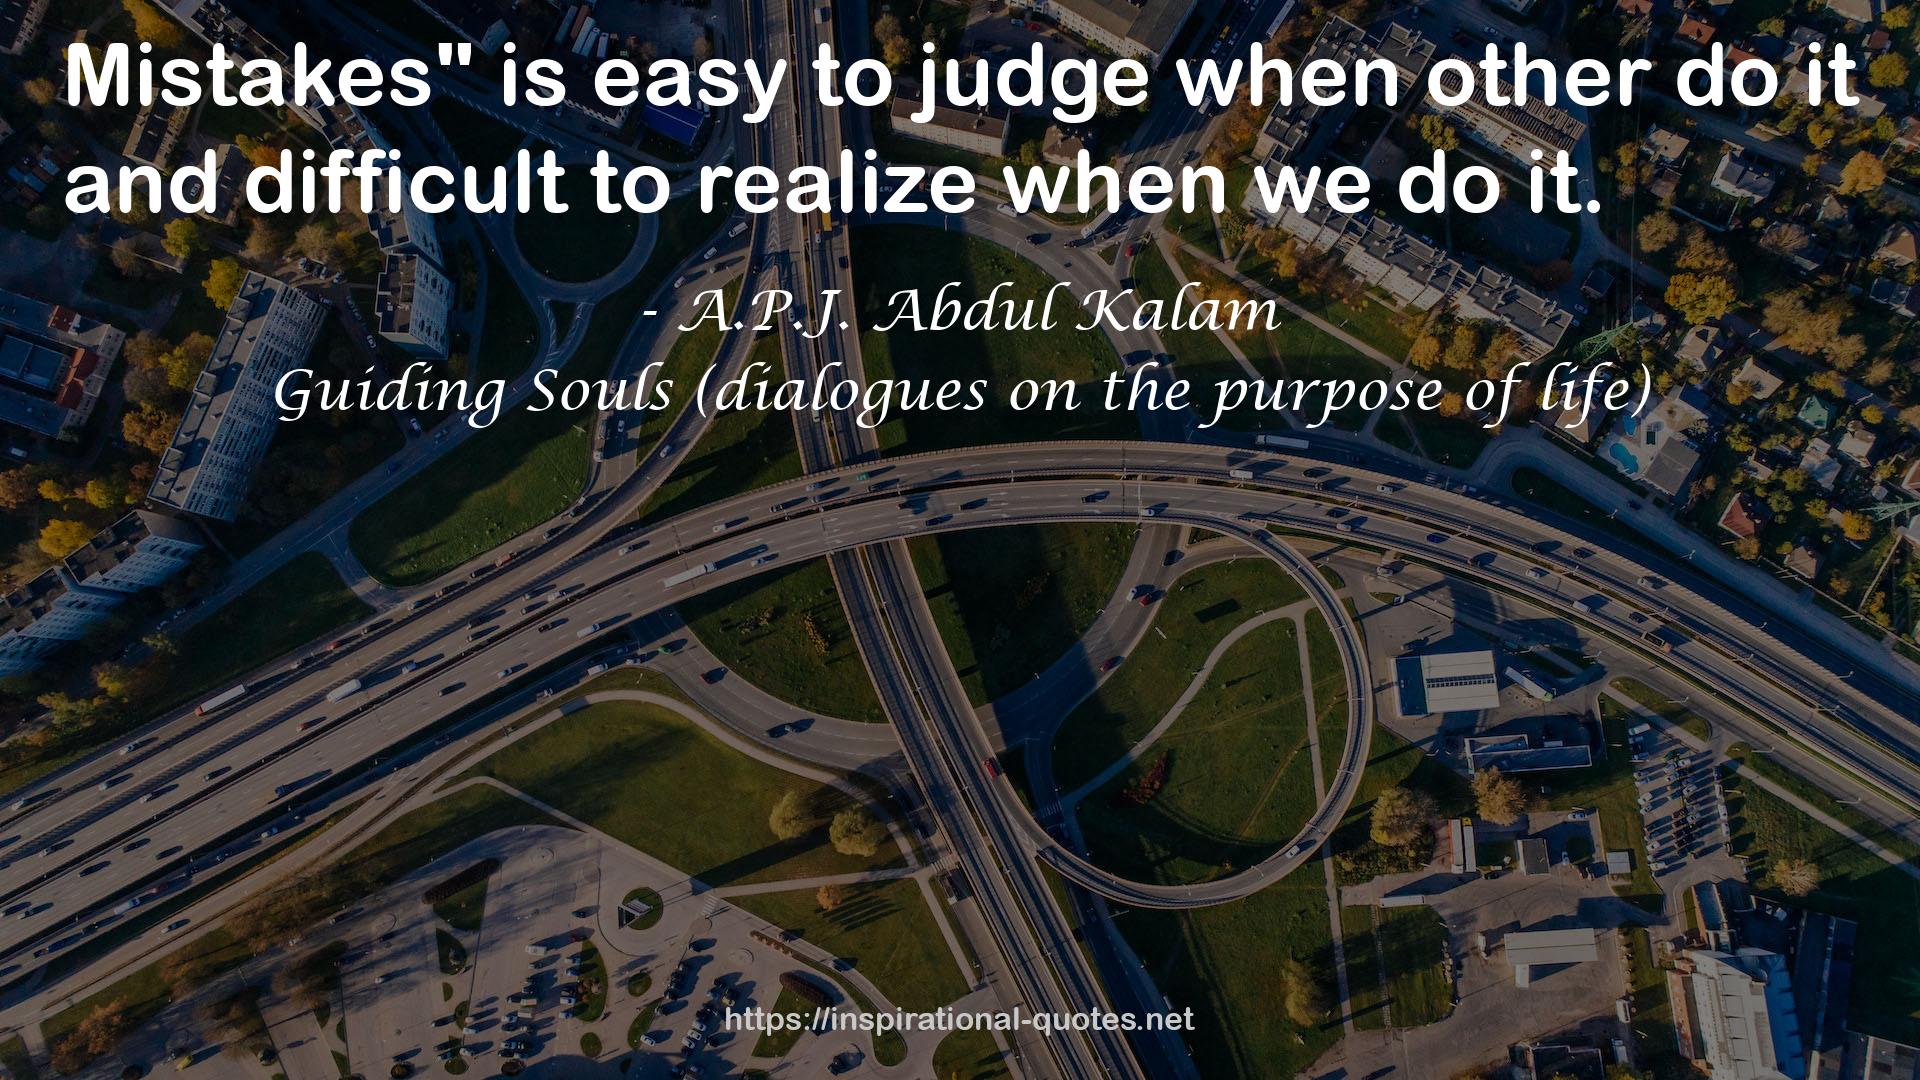 Guiding Souls (dialogues on the purpose of life) QUOTES